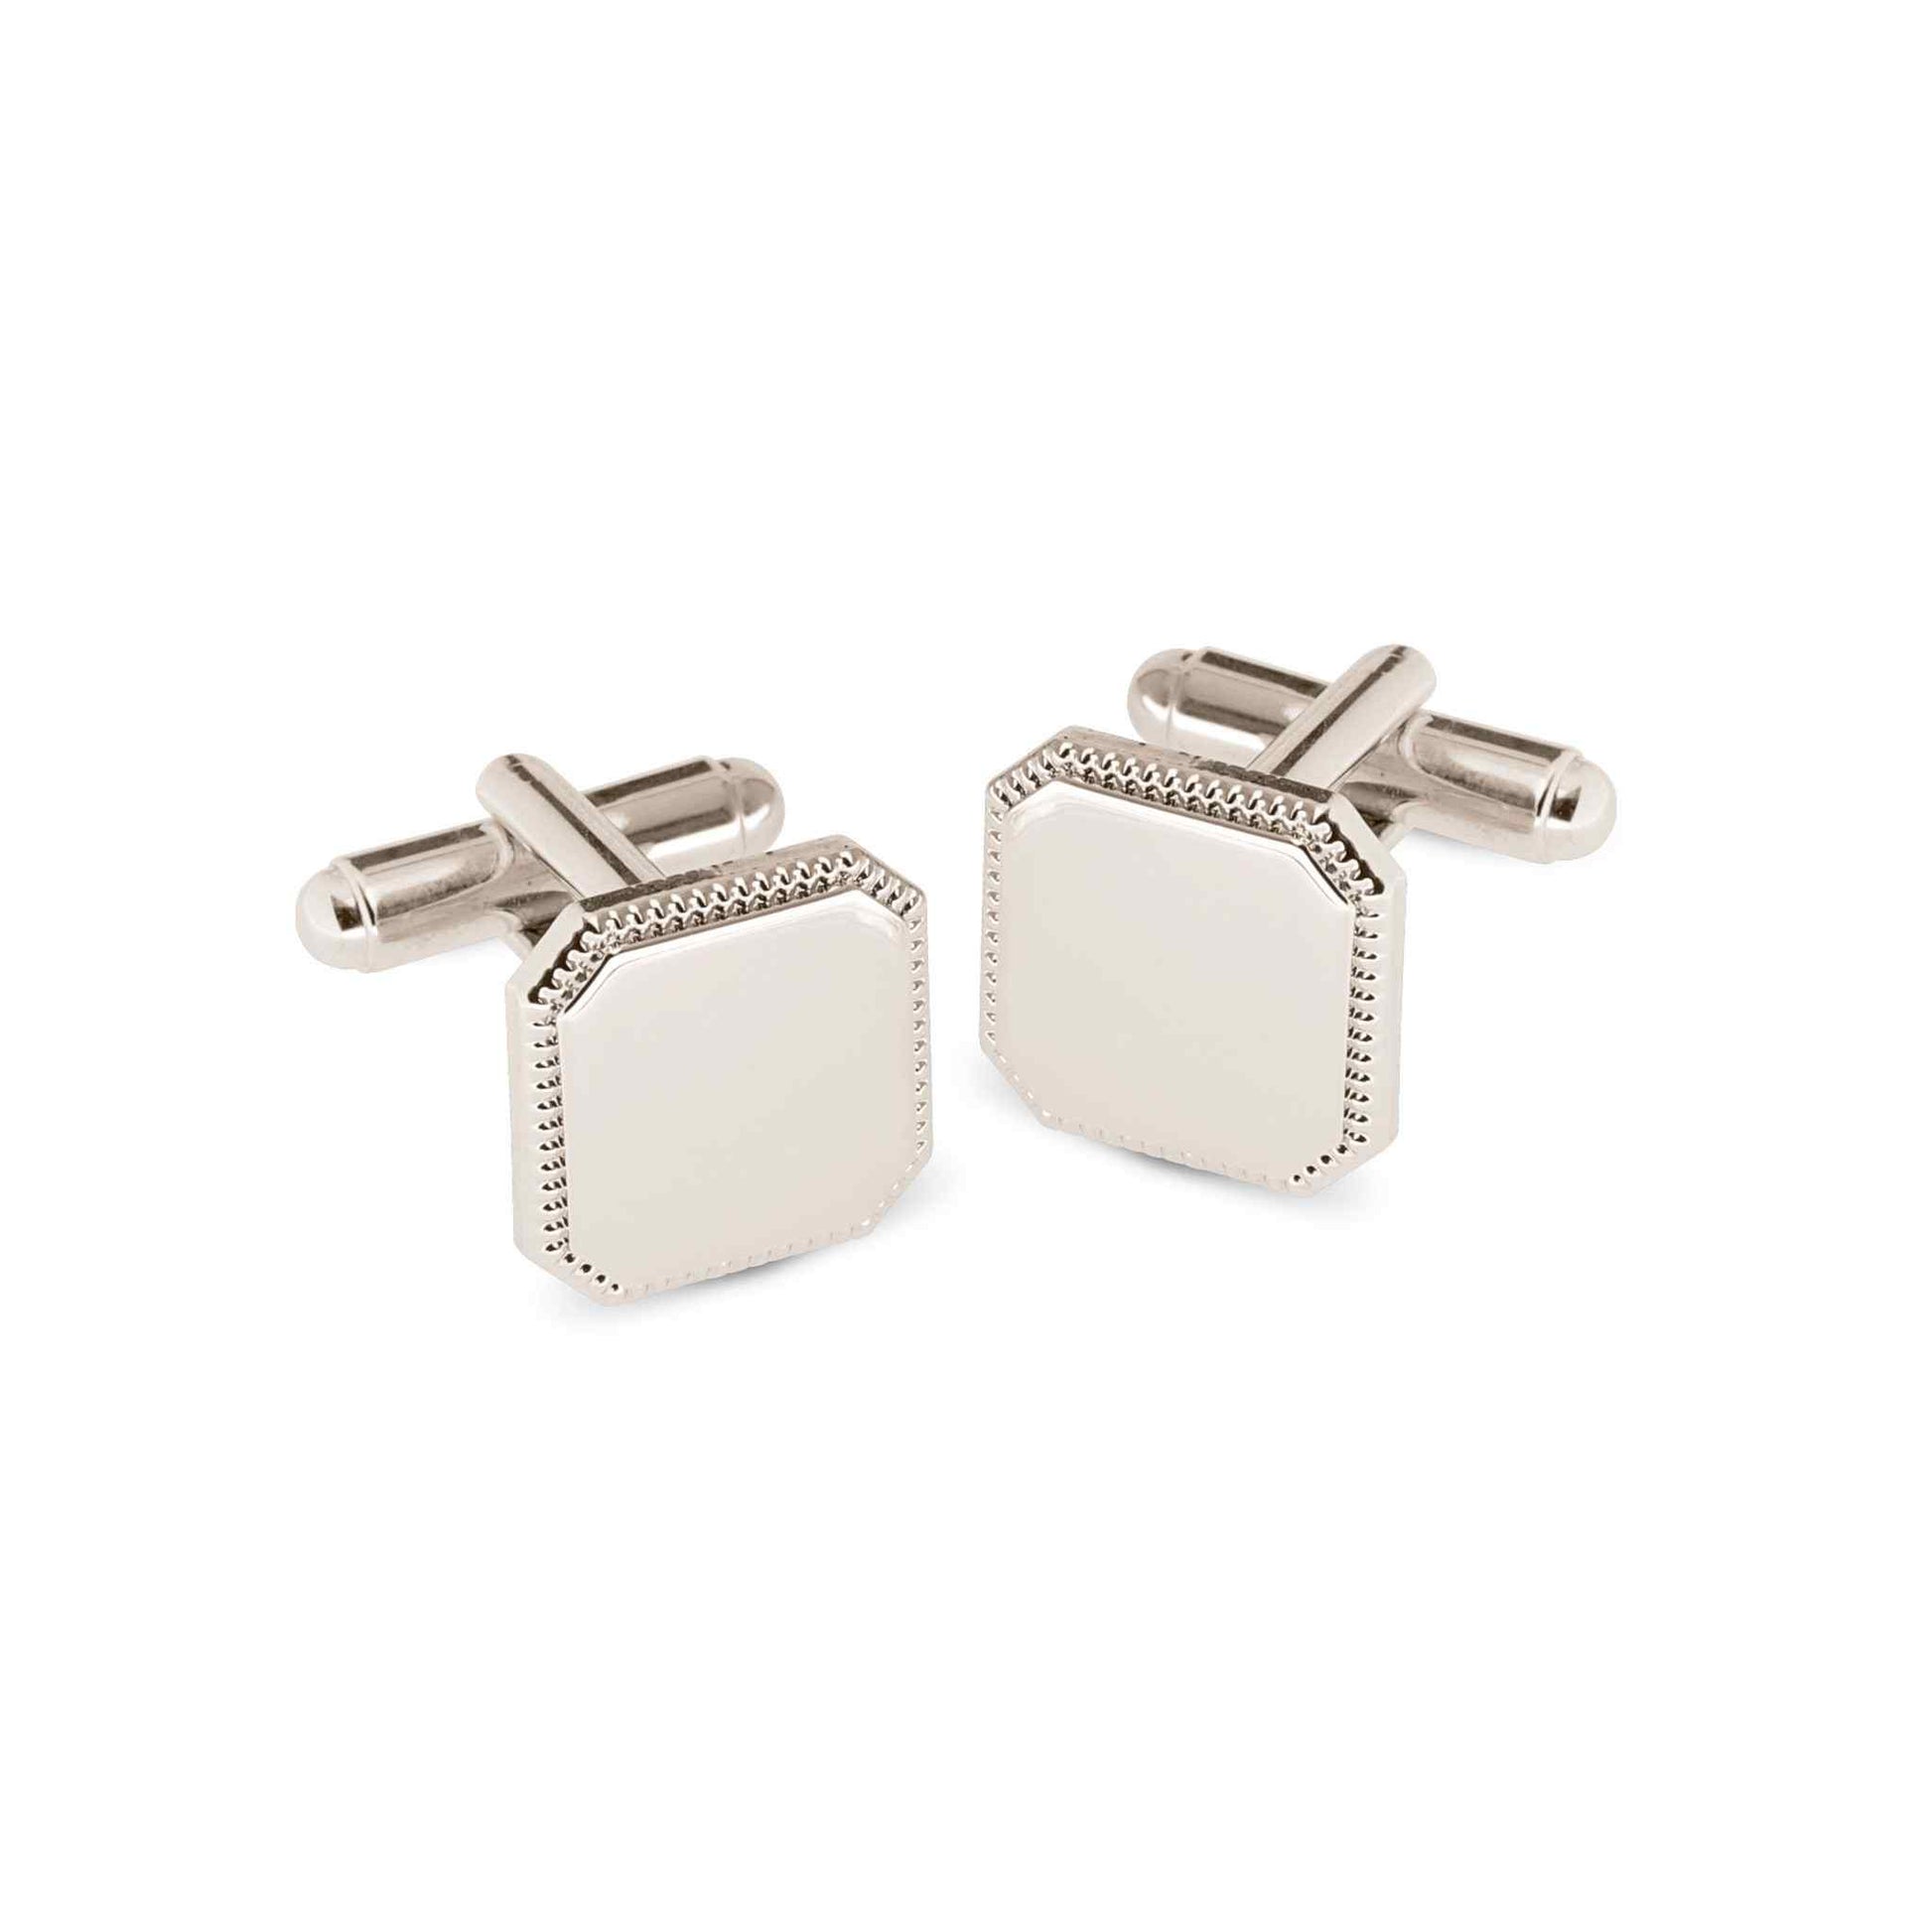 A square cufflinks with beaded edge displayed on a neutral white background.